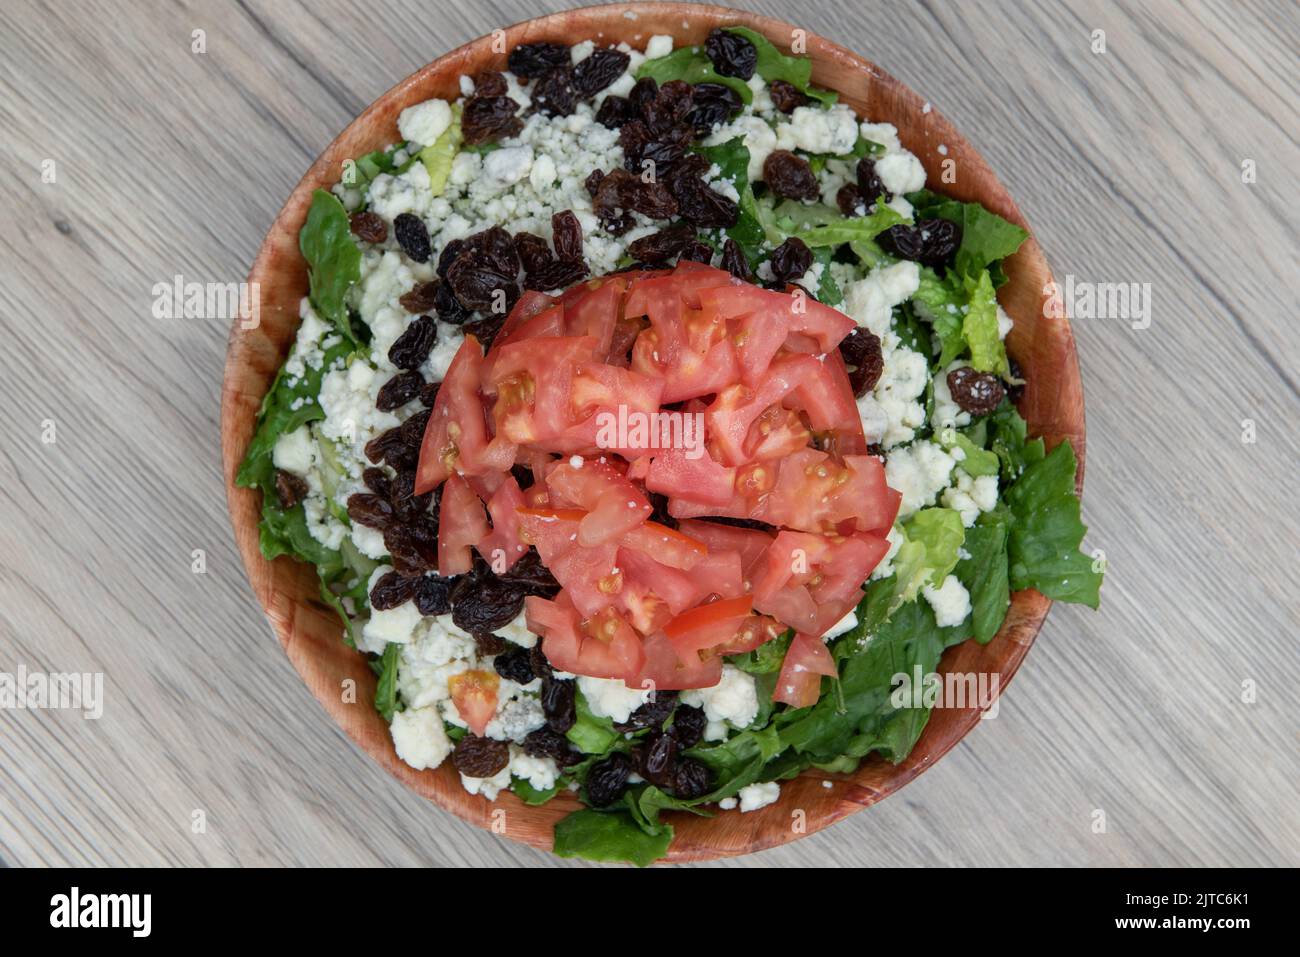 Overhead view of bleu cheese and walnut salad is delicately balanced tall with chopped tomato, raisins, and romaine lettuce and is a meal within itsel Stock Photo